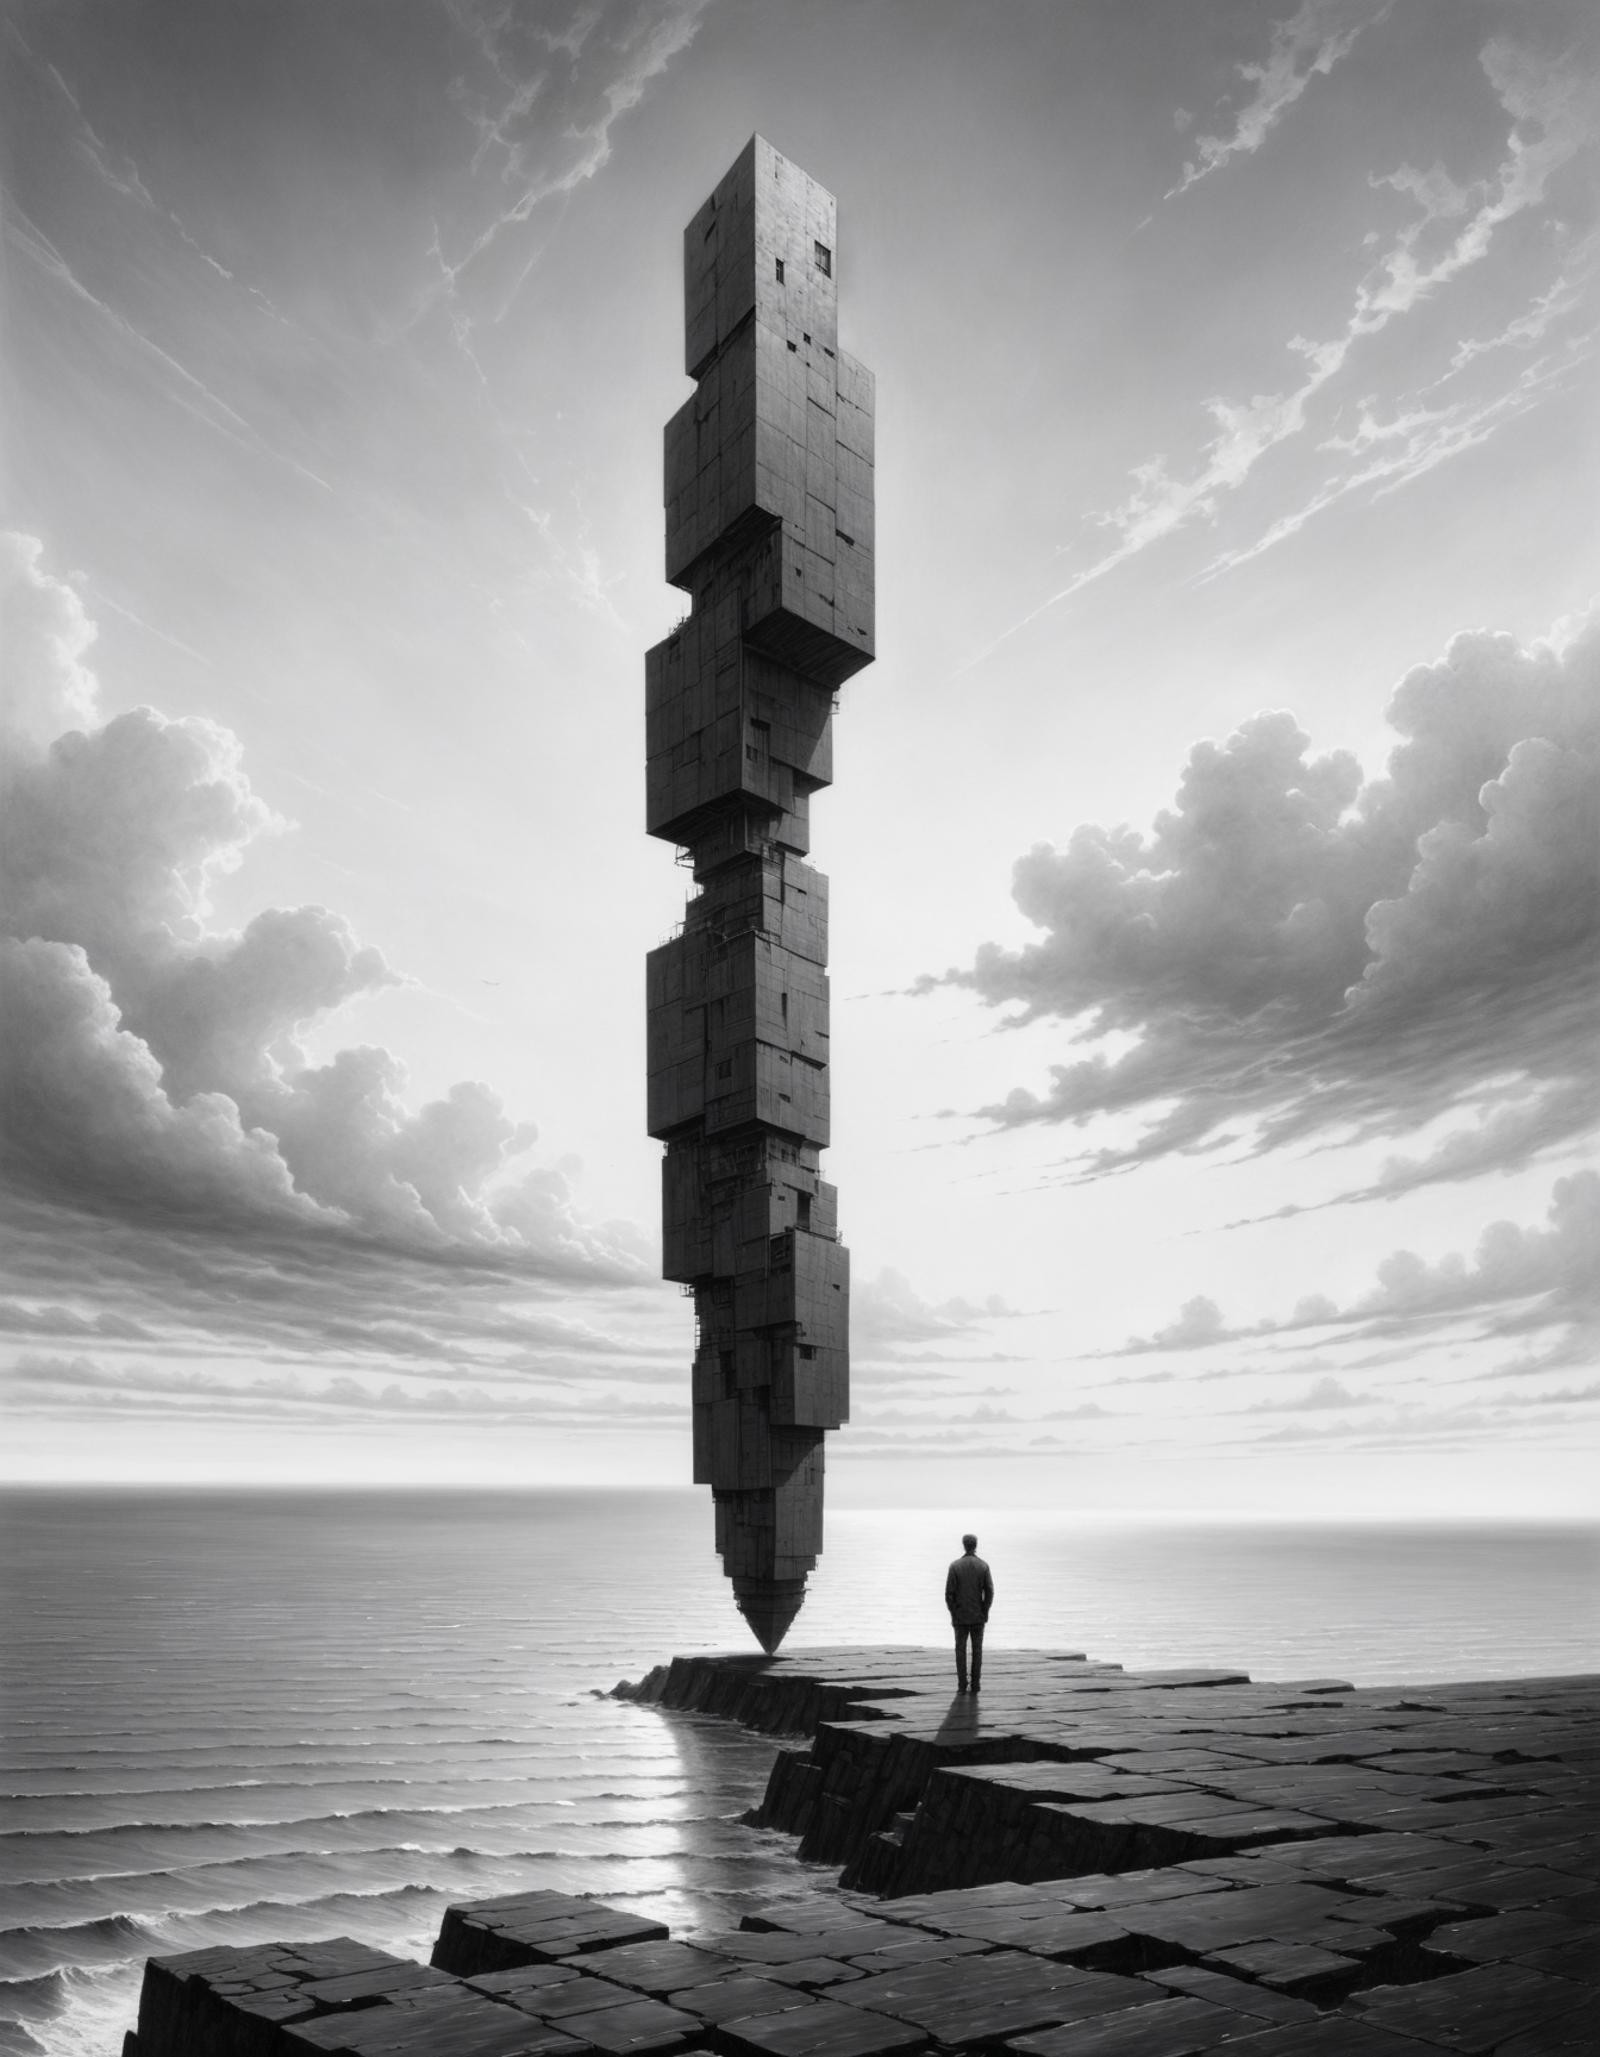 A person standing in front of a very tall stack of blocks or cubes near the ocean.